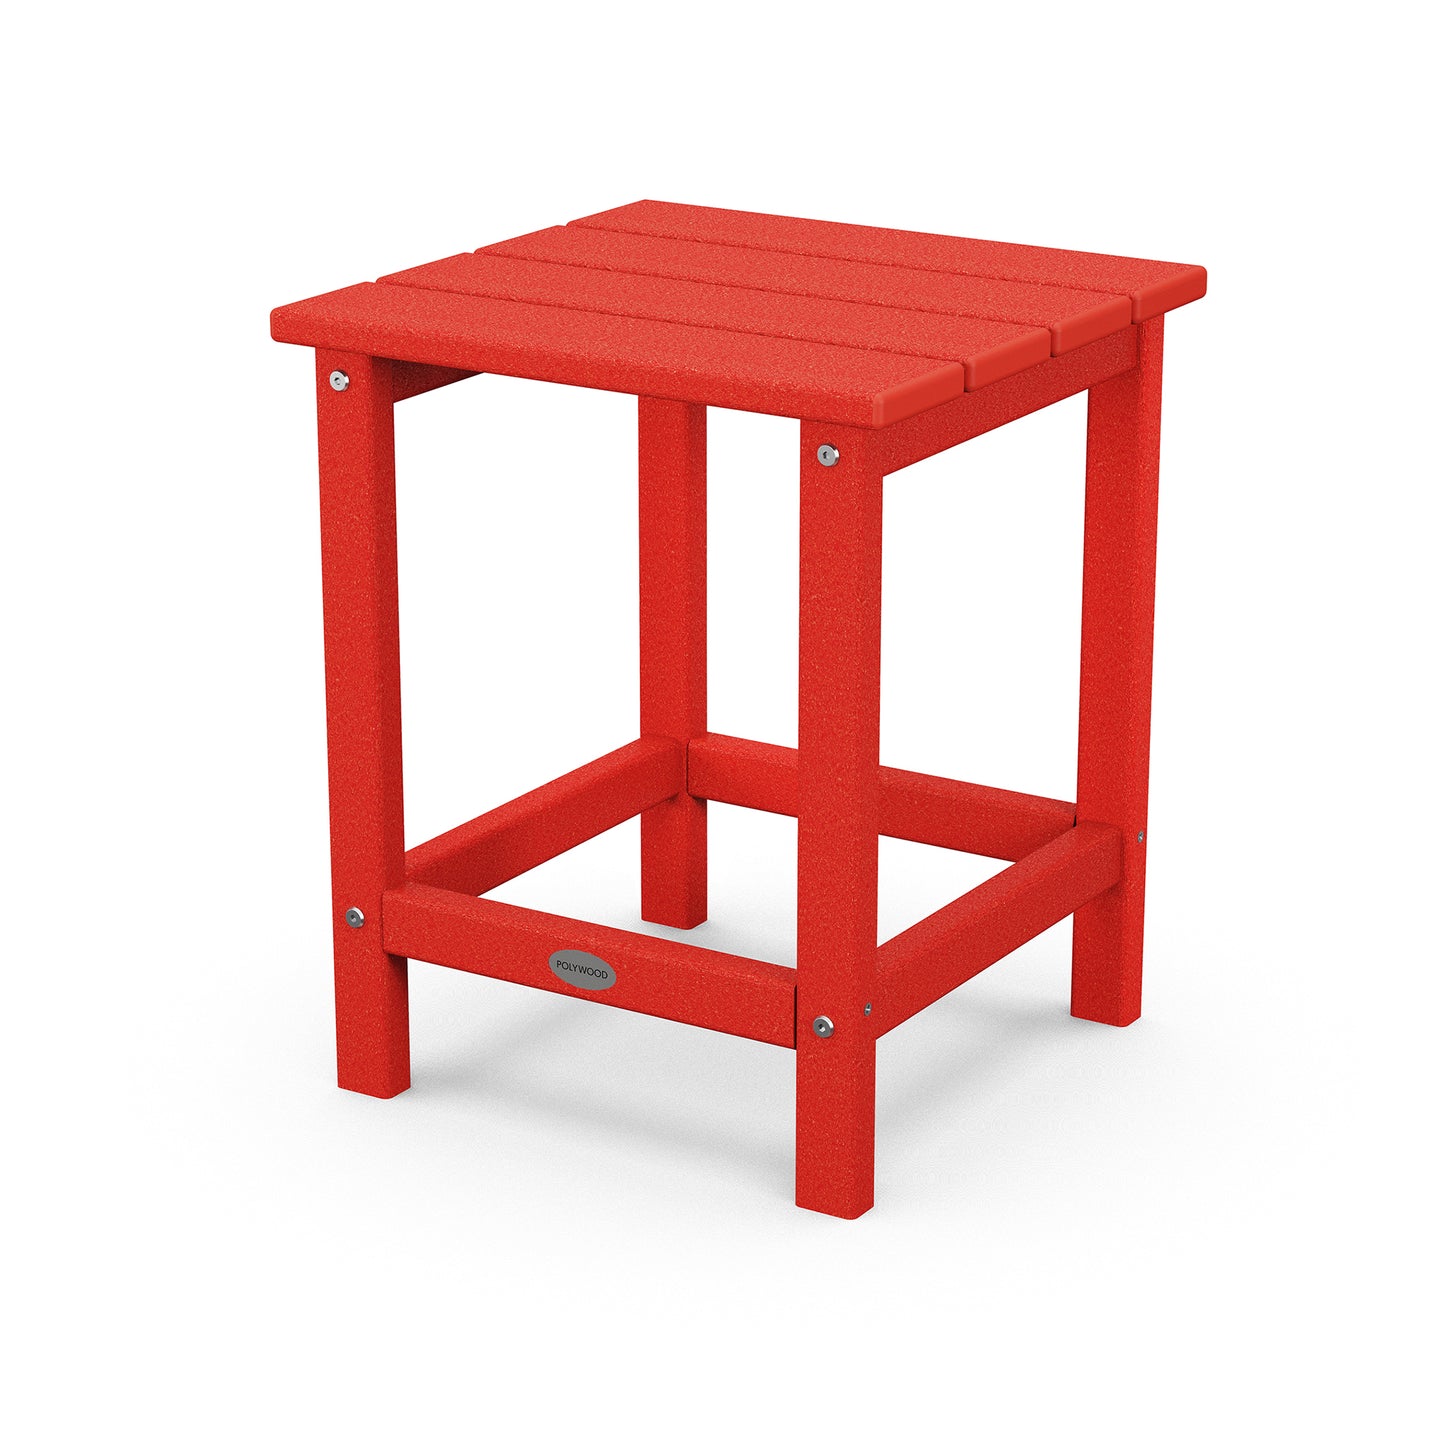 A bright red, square, POLYWOOD® Long Island 18" Side Table with four sturdy legs and a simple, flat top. The sides are reinforced by lower crossbars near the base, and there are silver bolts visible.